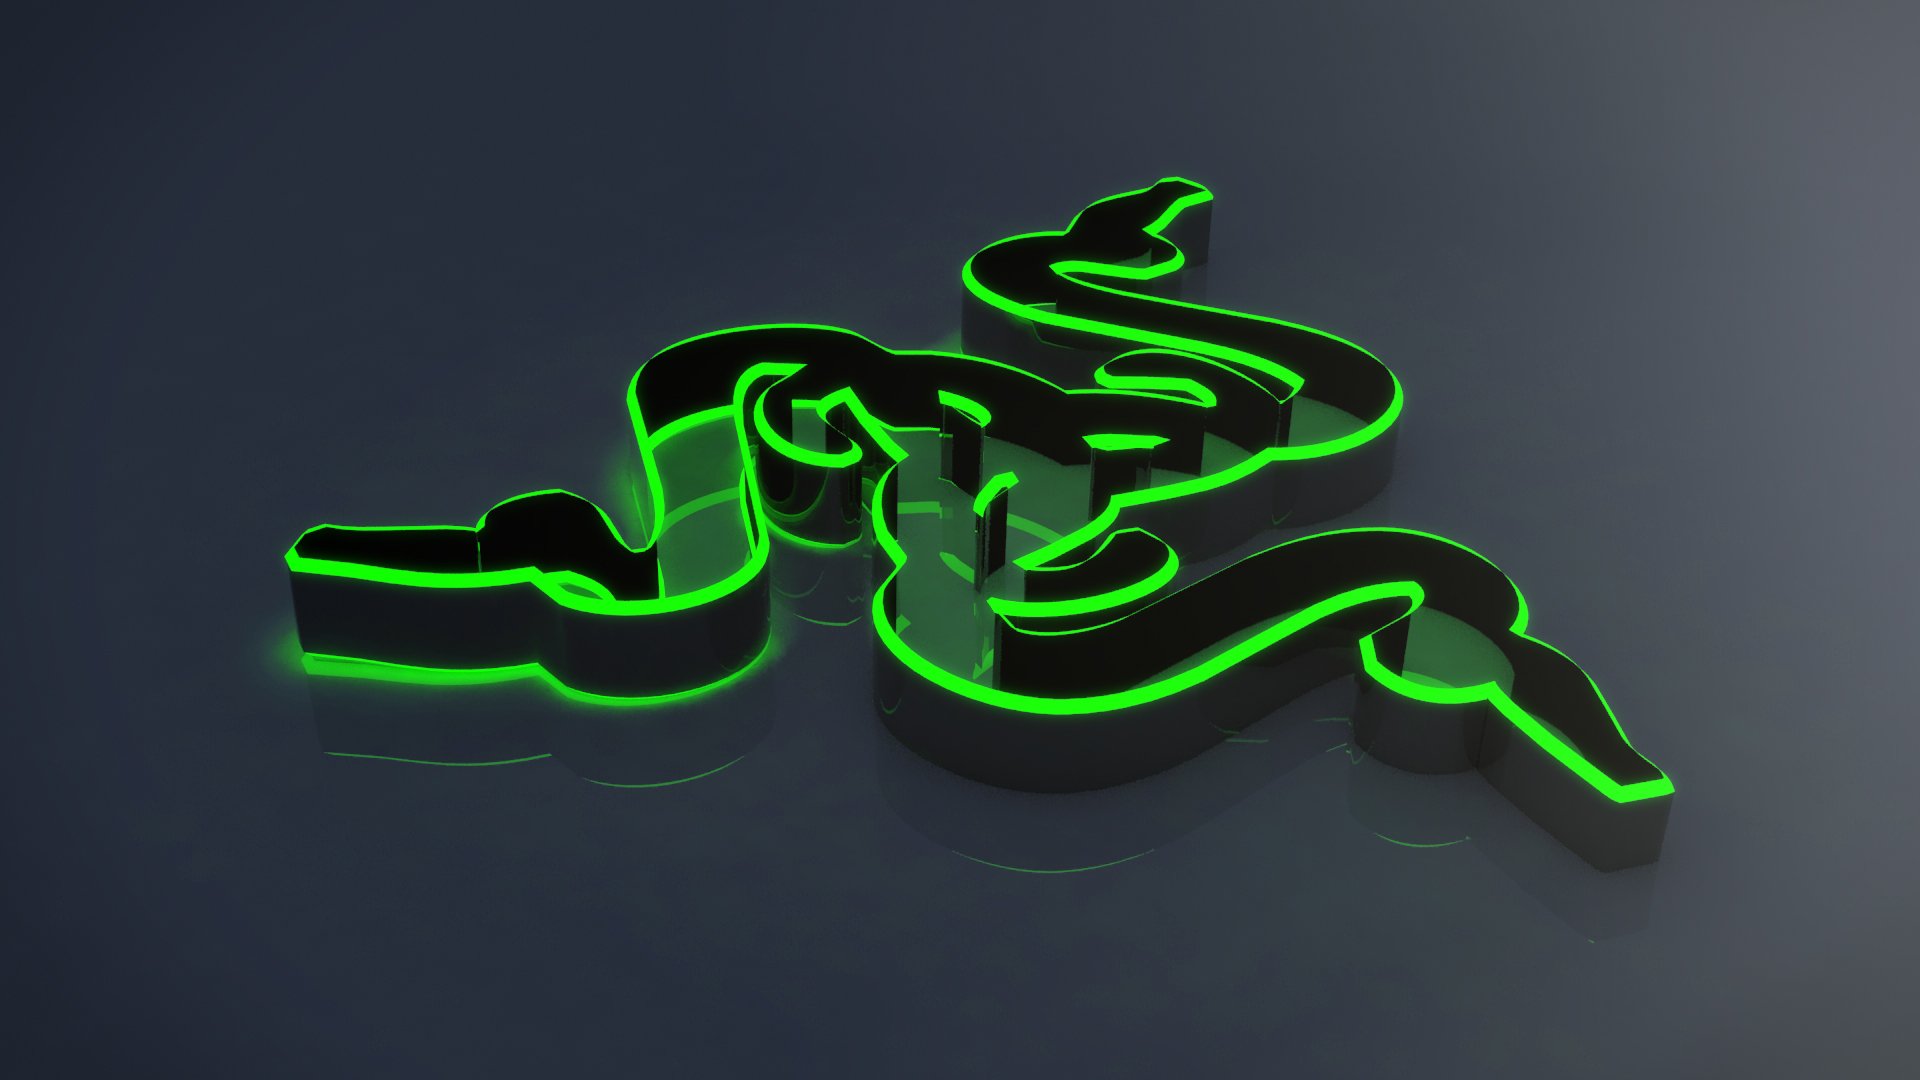 Free Download Razer Gaming Computer Game 2 Wallpaper 19x1080 19x1080 For Your Desktop Mobile Tablet Explore 48 Pc Gaming Wallpaper 1080p Gaming Wallpaper Hd Hd Video Game Wallpaper Hd Wallpaper Downloads Free